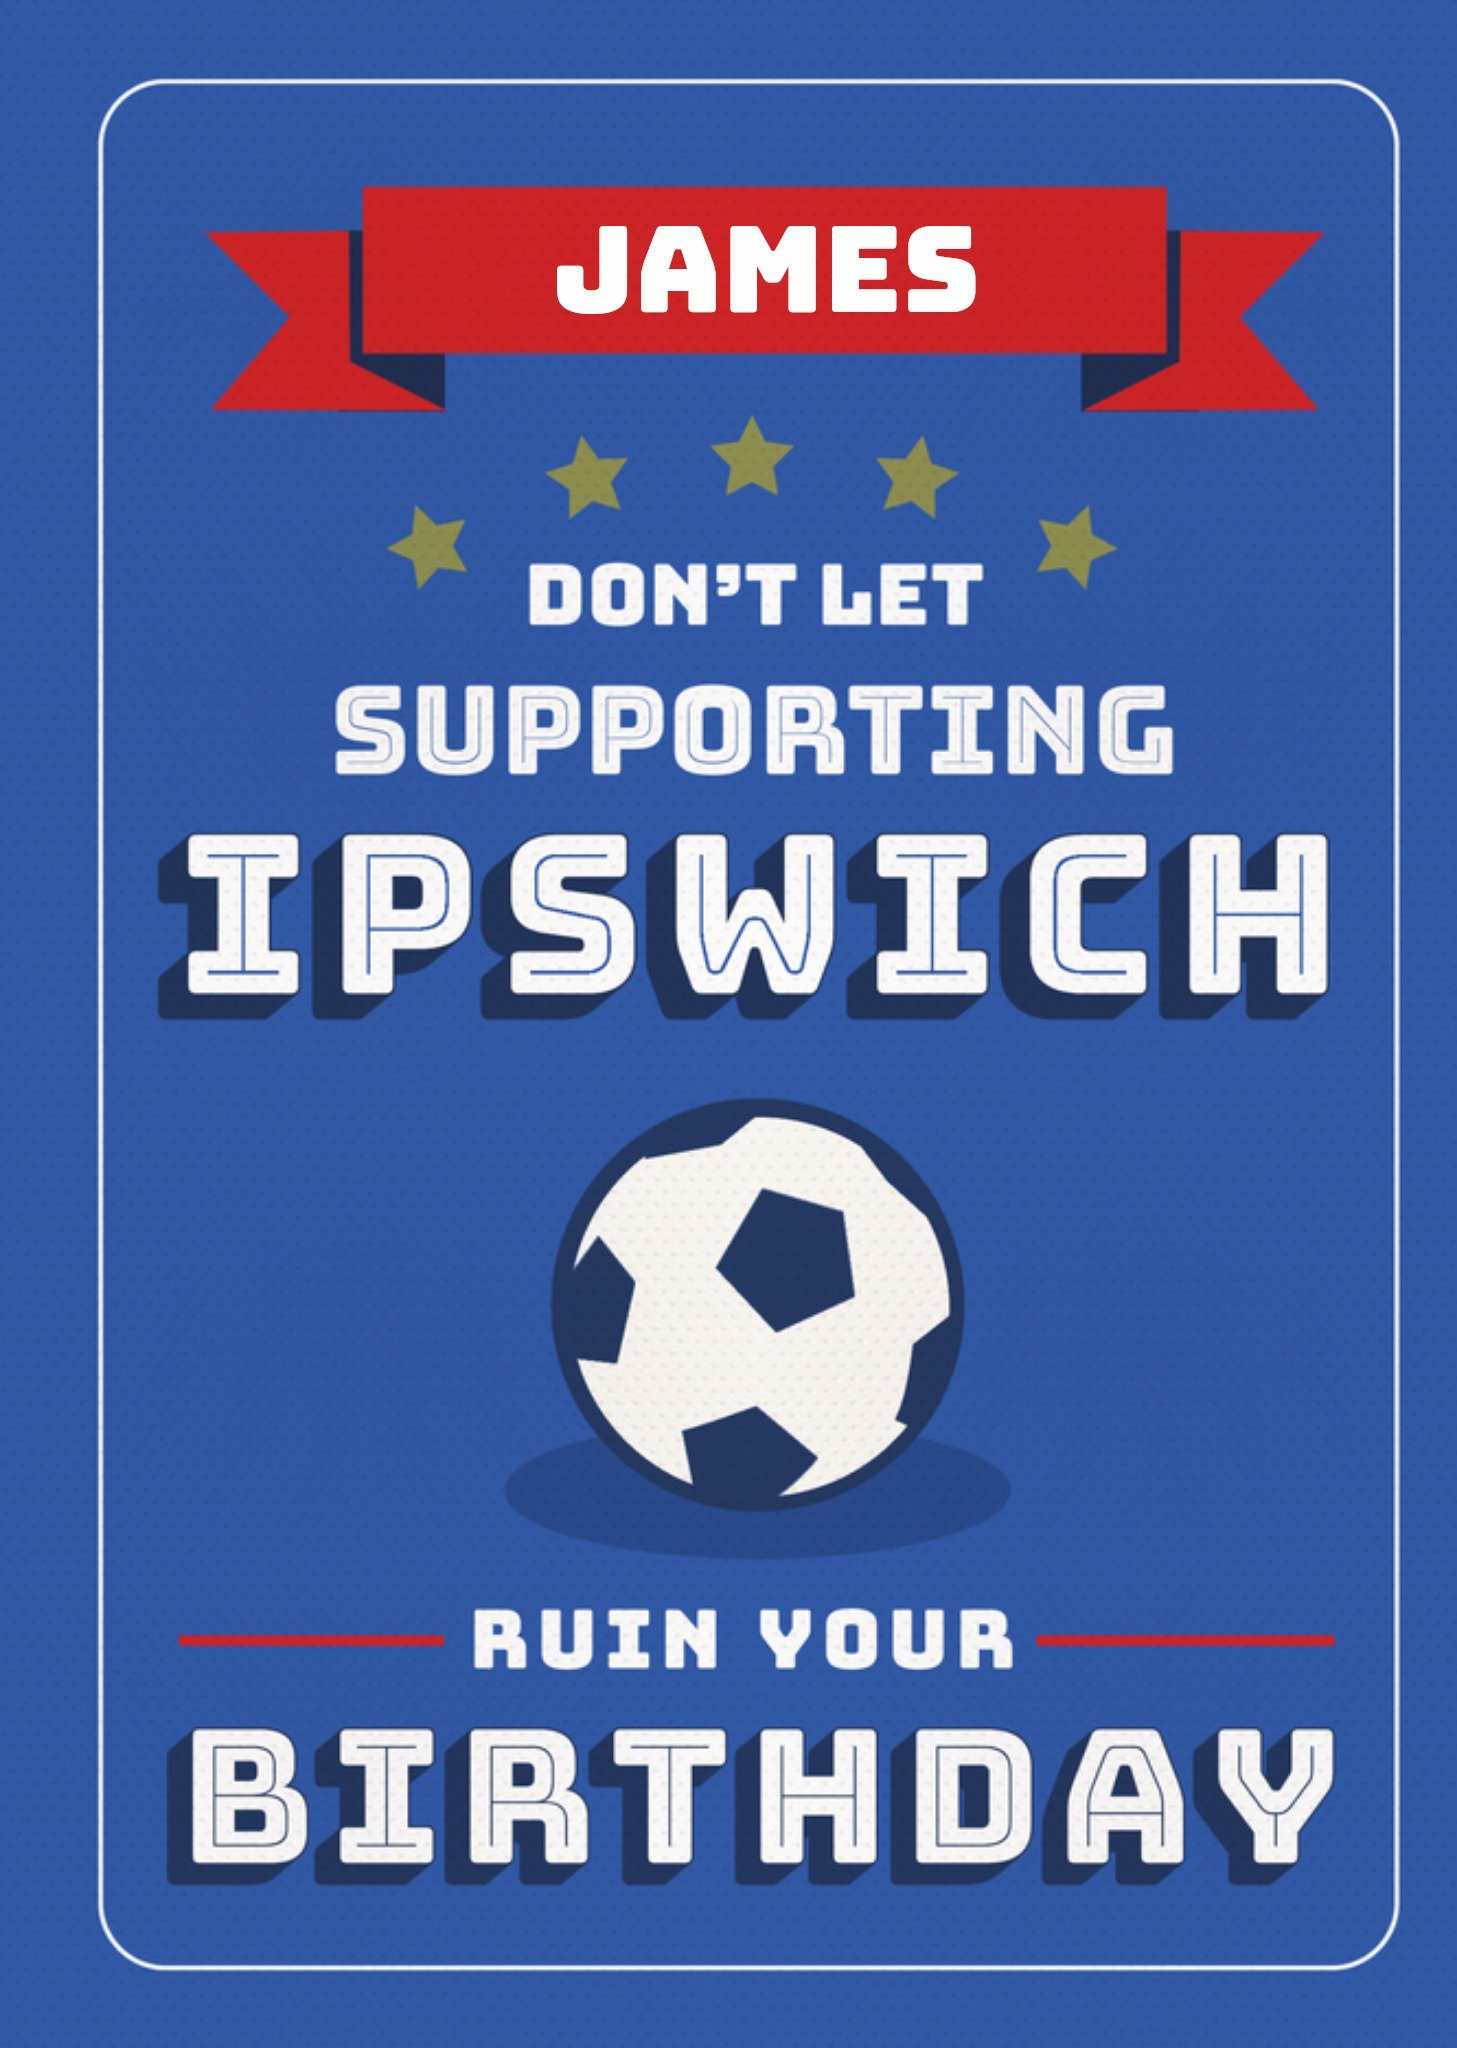 Moonpig Football Legends Don't Let Supporting Ipswich Ruin Your Birthday Card Ecard